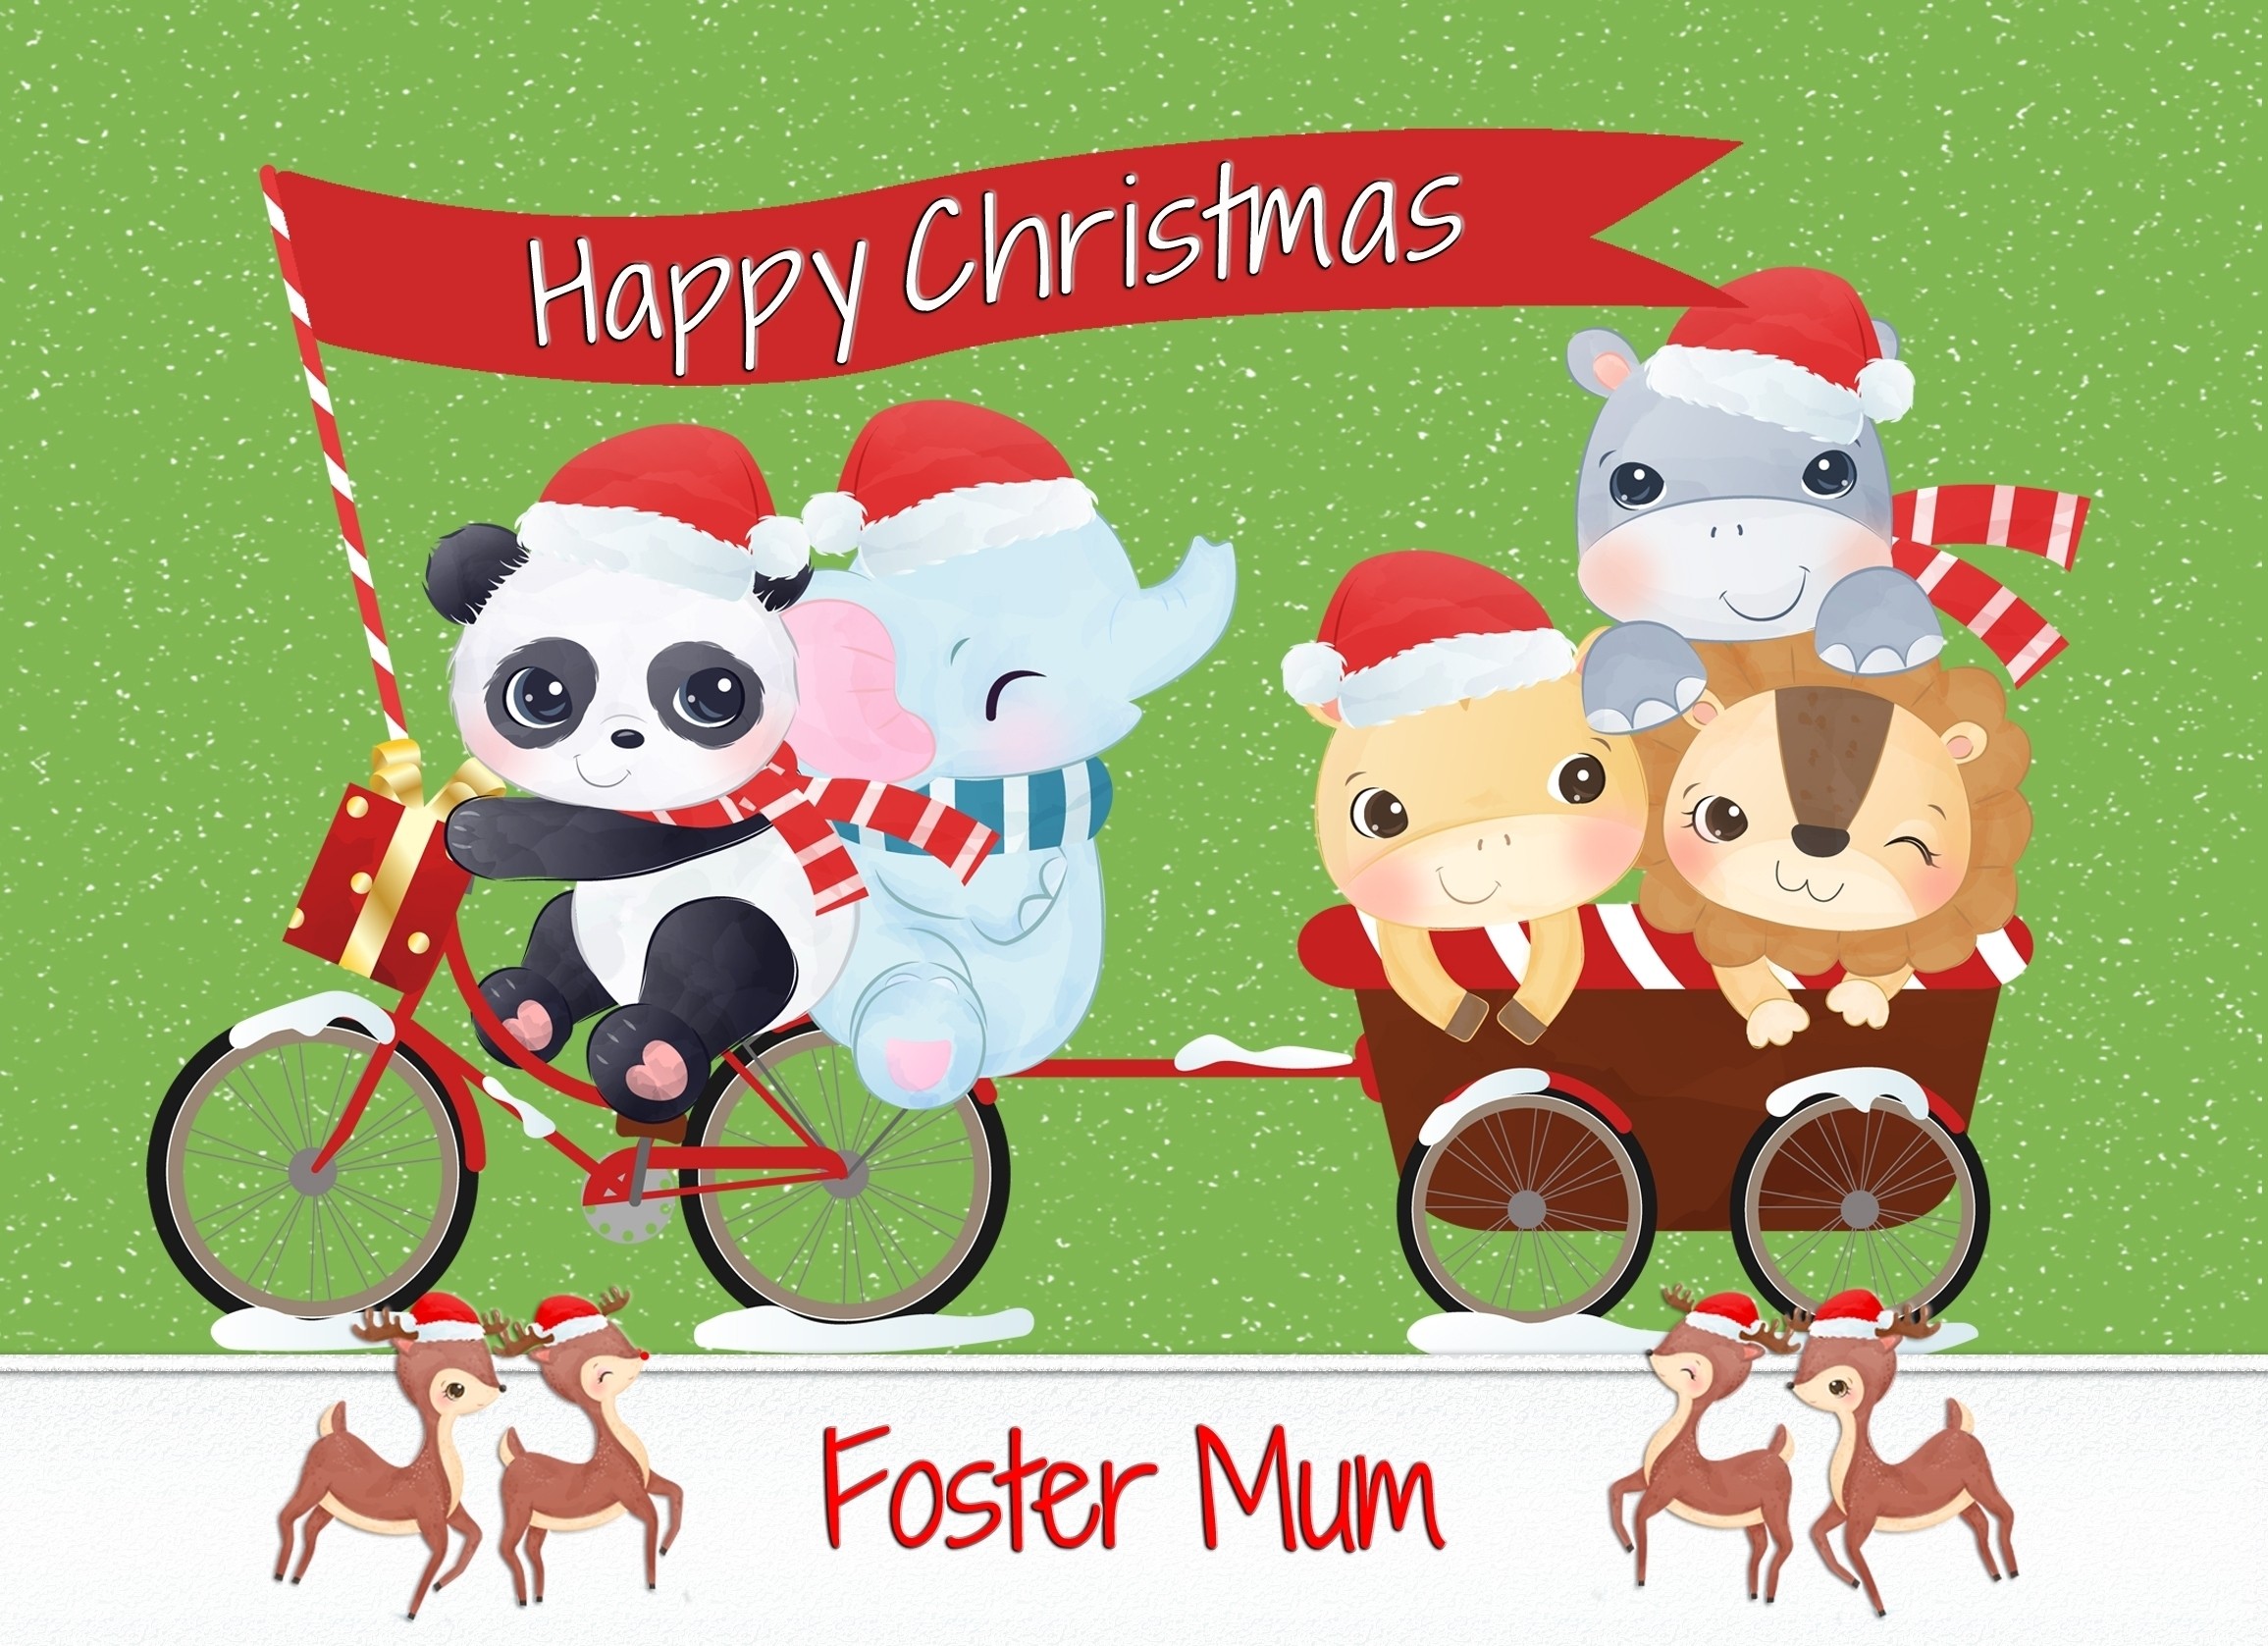 Christmas Card For Foster Mum (Green Animals)